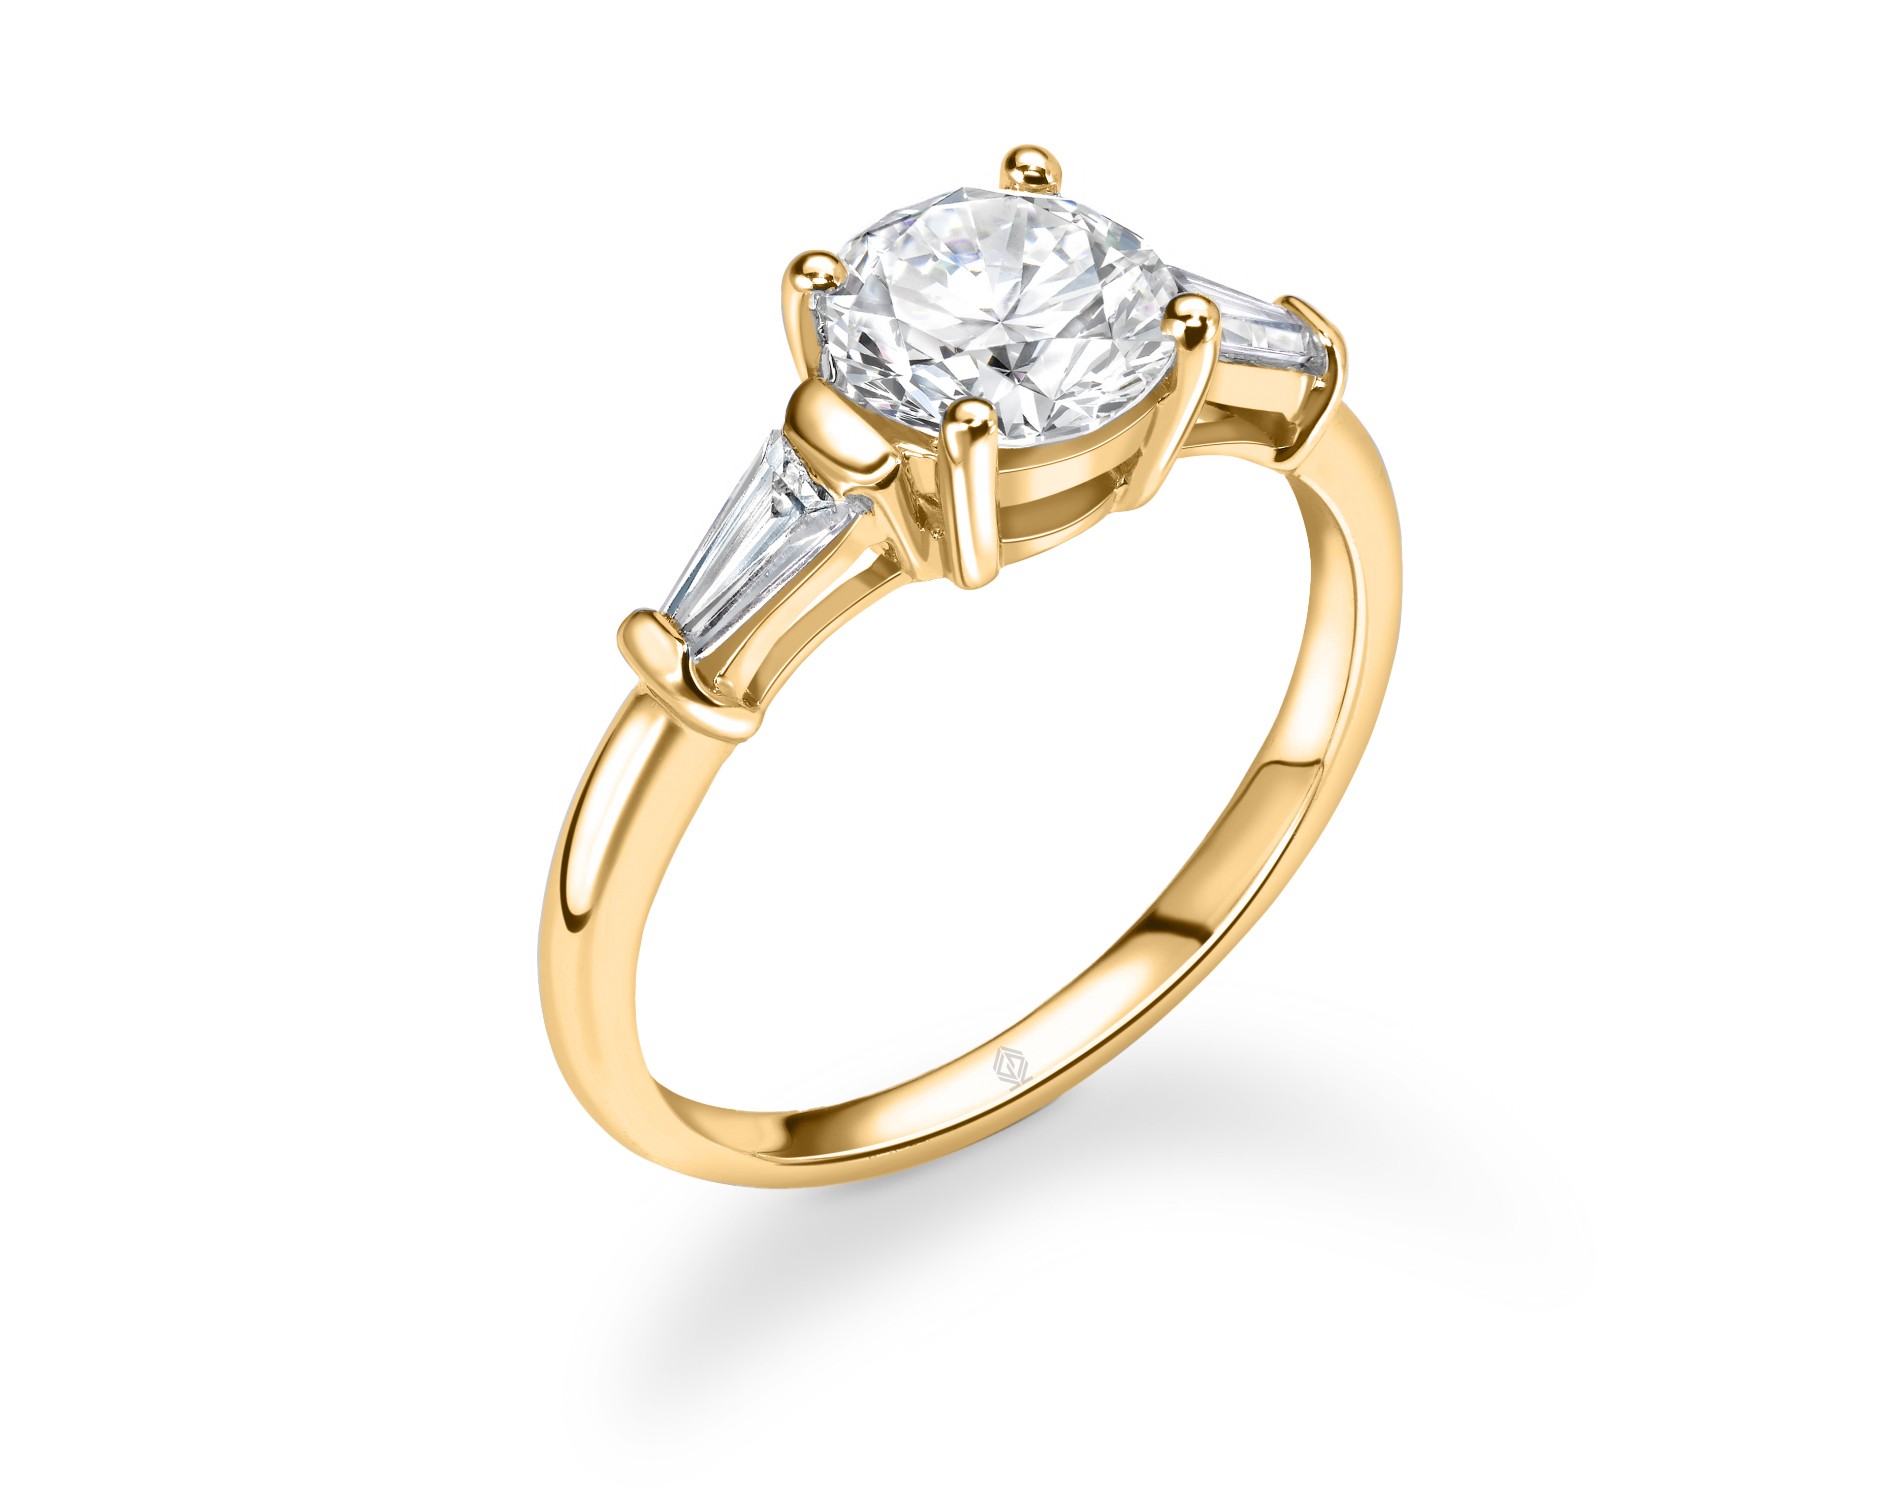 18K YELLOW GOLD ROUND CUT DIAMOND RING WITH BAGUETTES CUT SIDE STONES